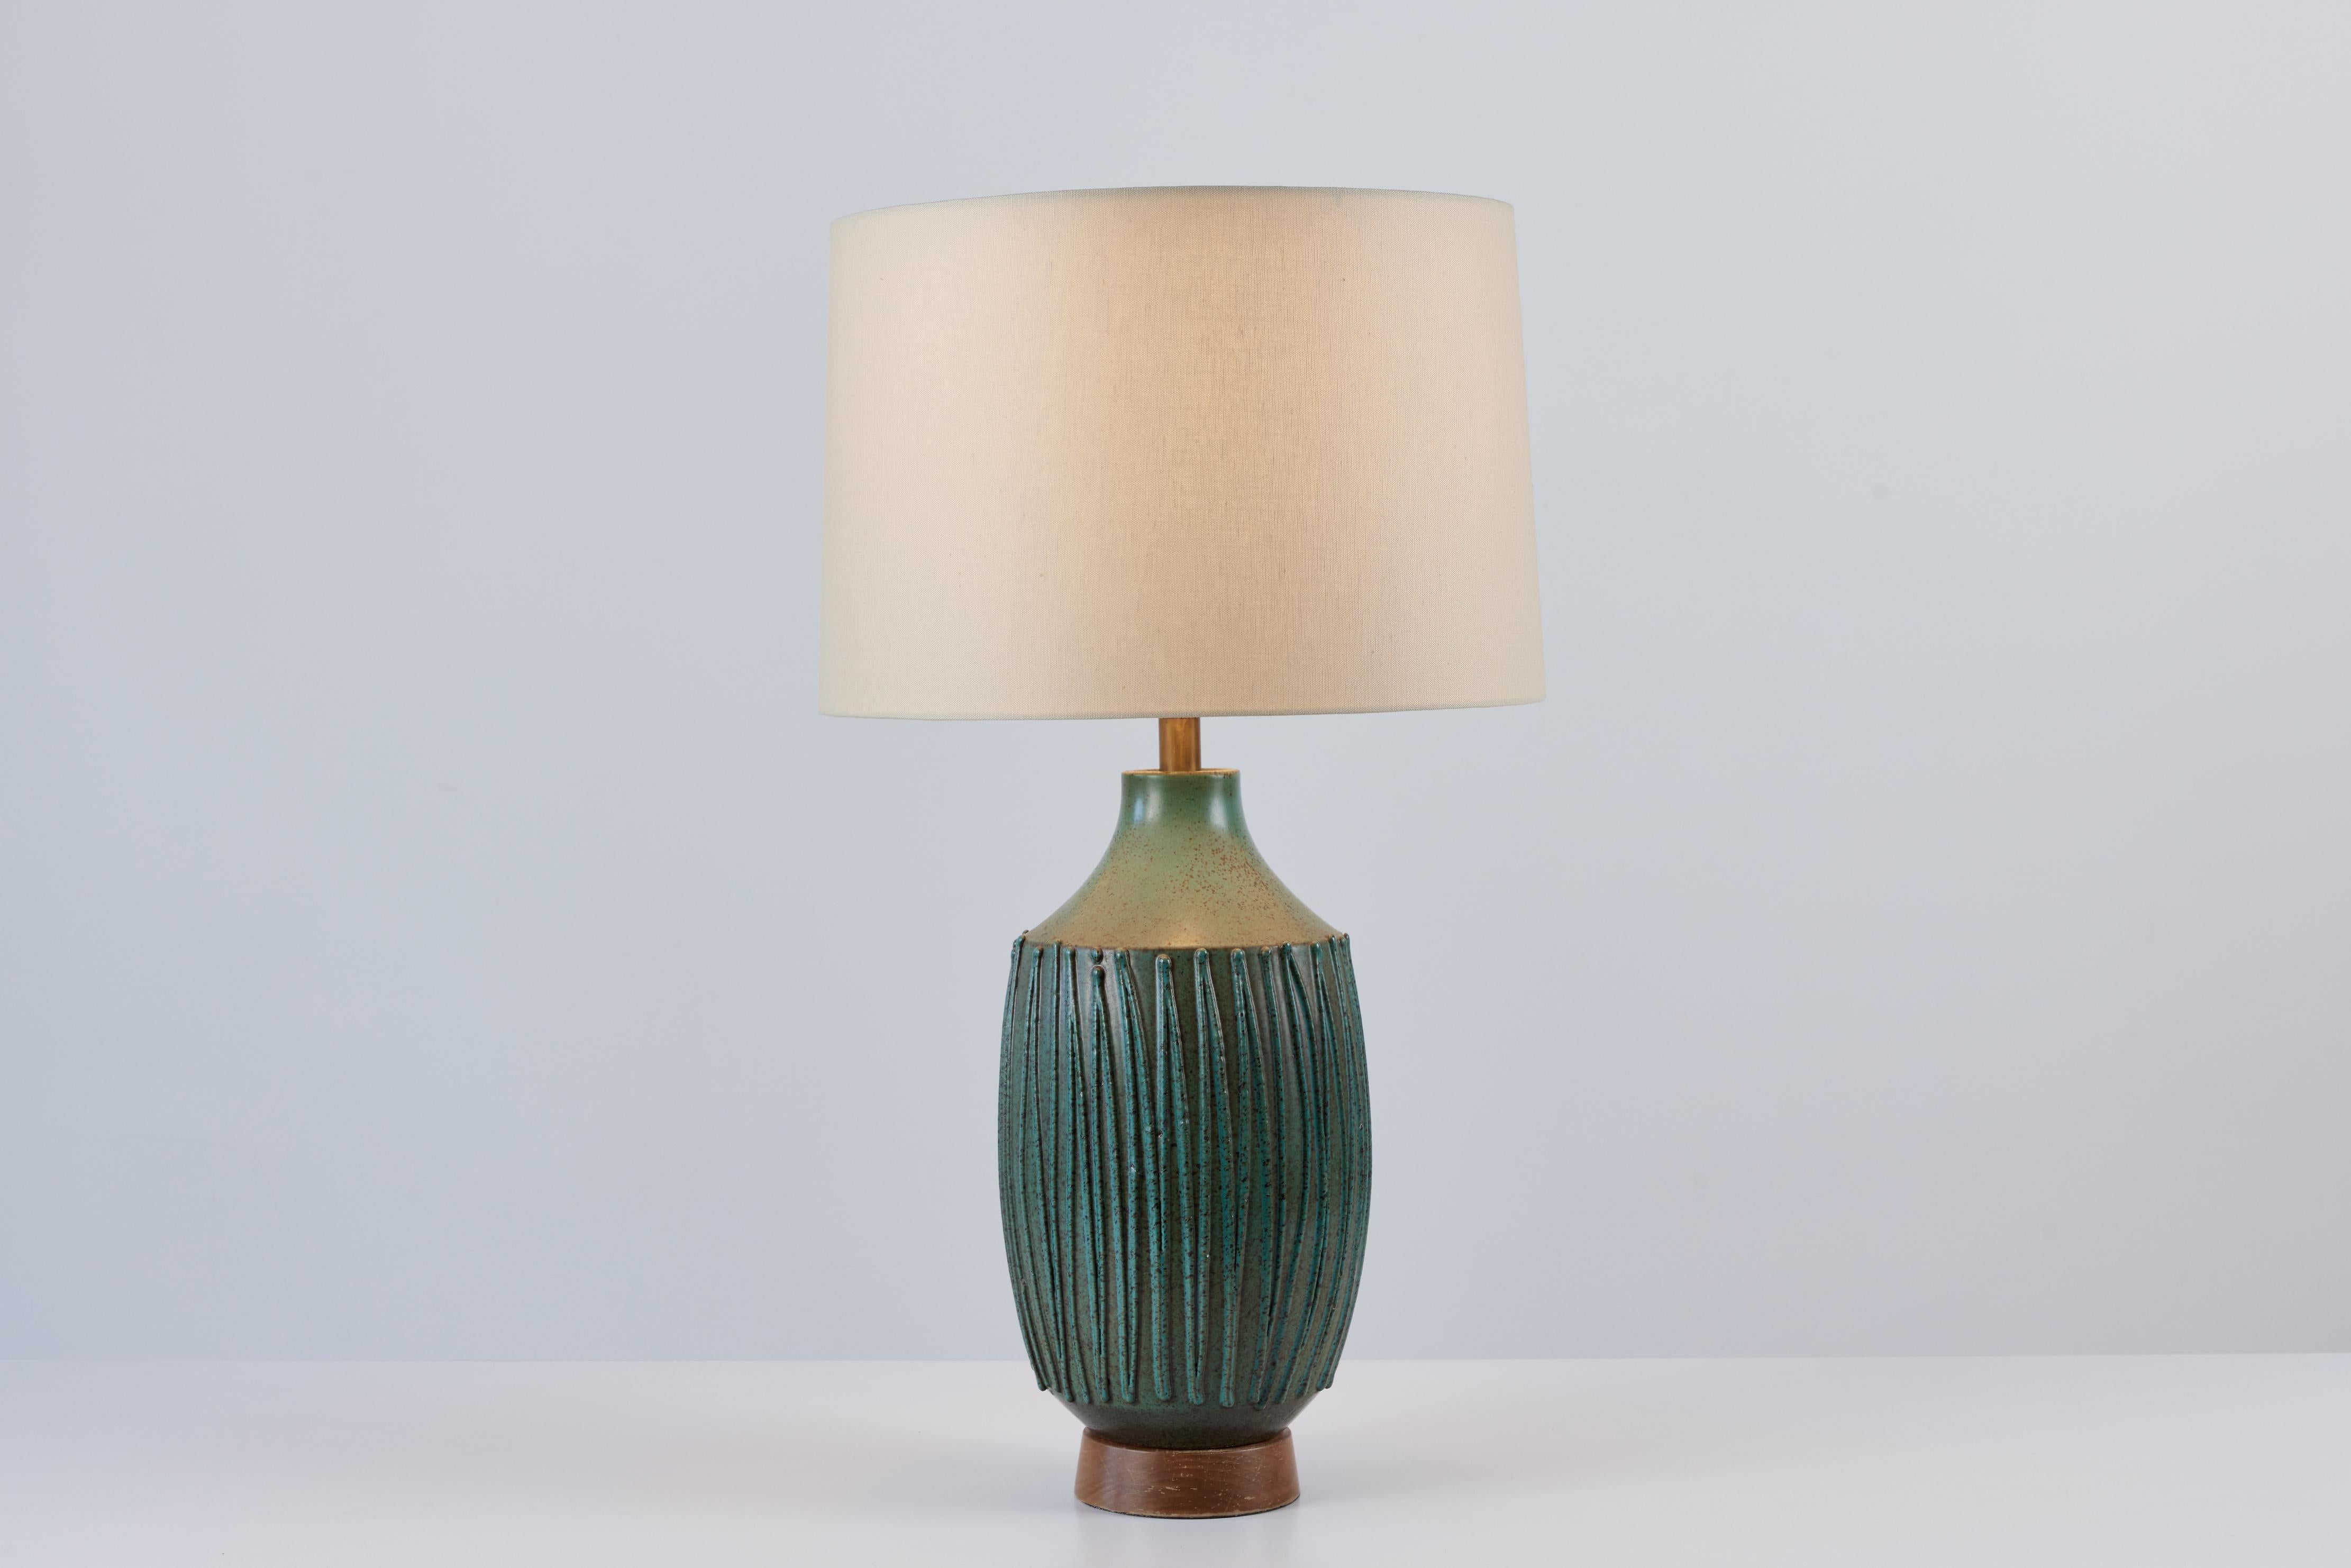 Glazed David Cressey Textured Stoneware Lamp for Architectural Pottery